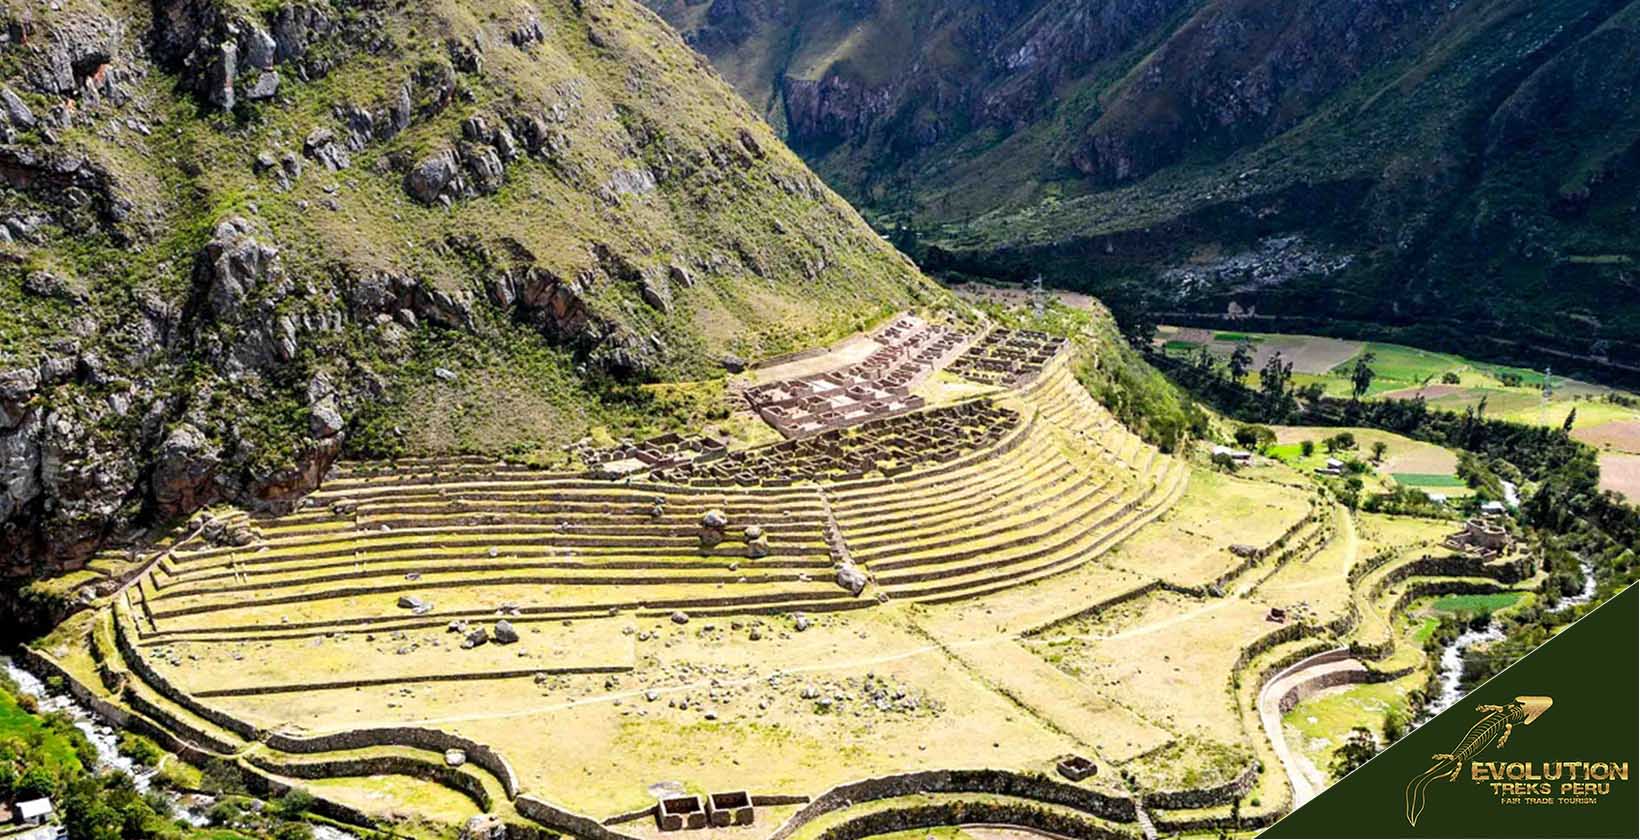 Patallacta Peru Guide: History, Hiking, Facts, Maps, and Tours